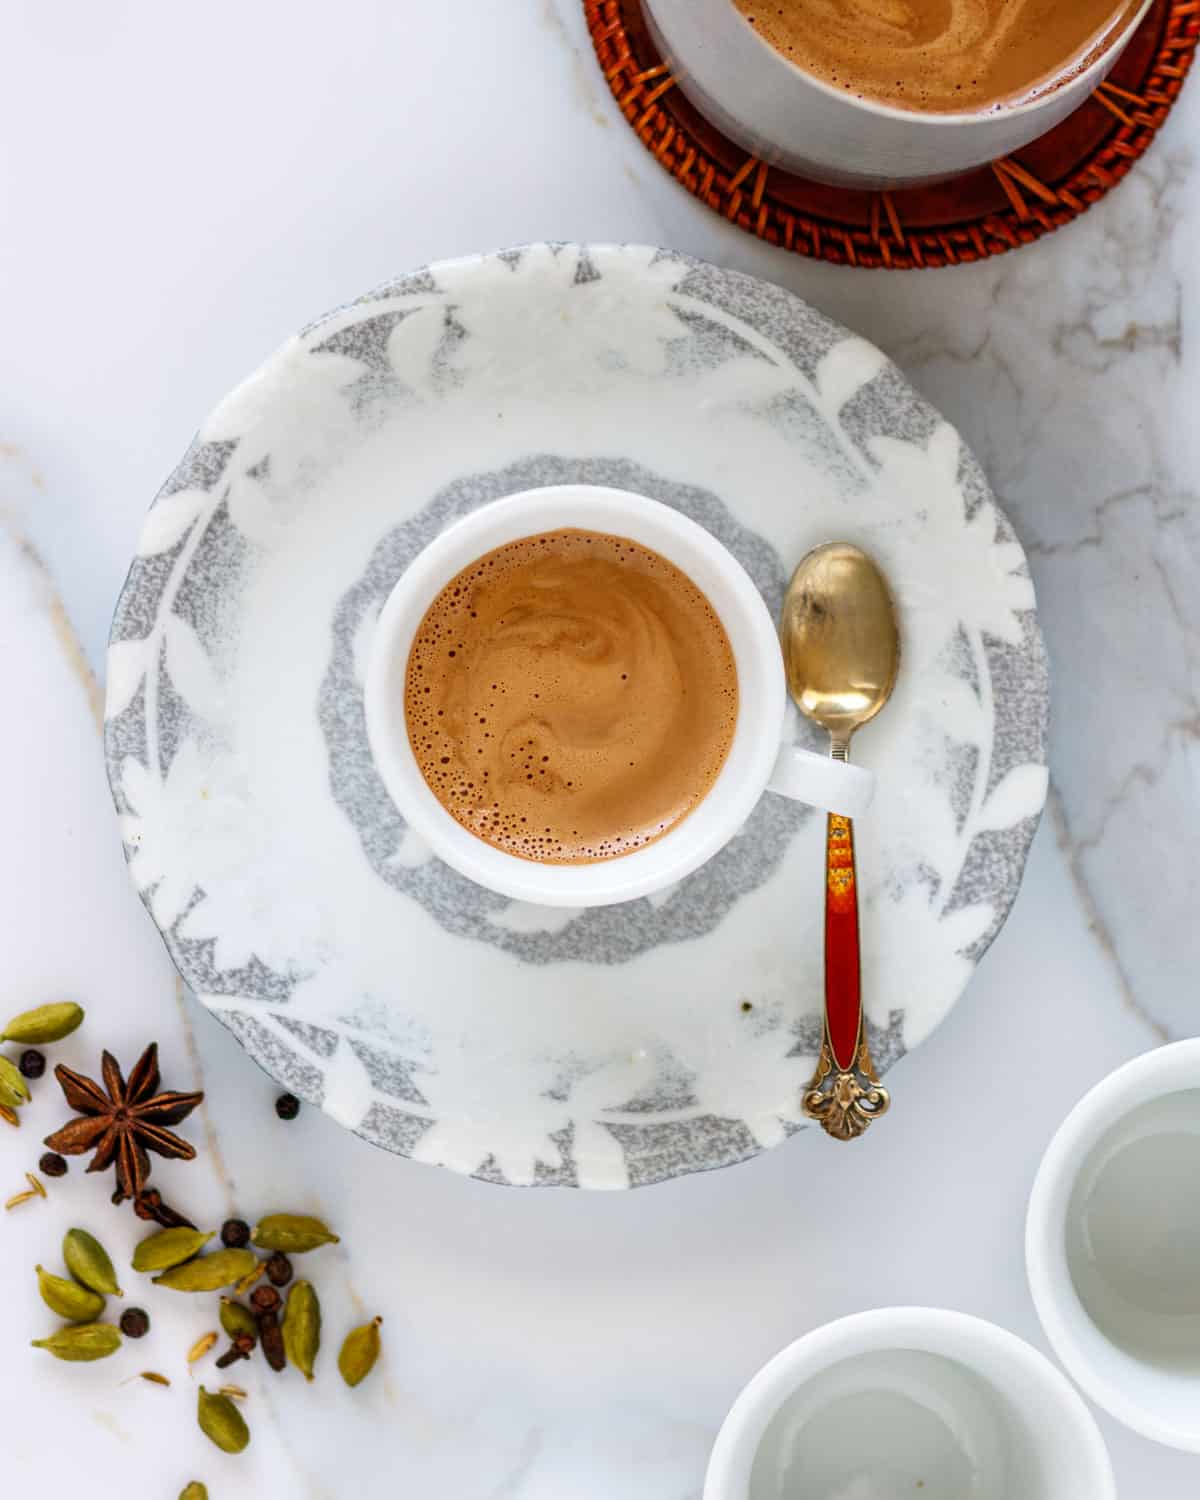 Small cup of Indian spiced tea on a saucer.